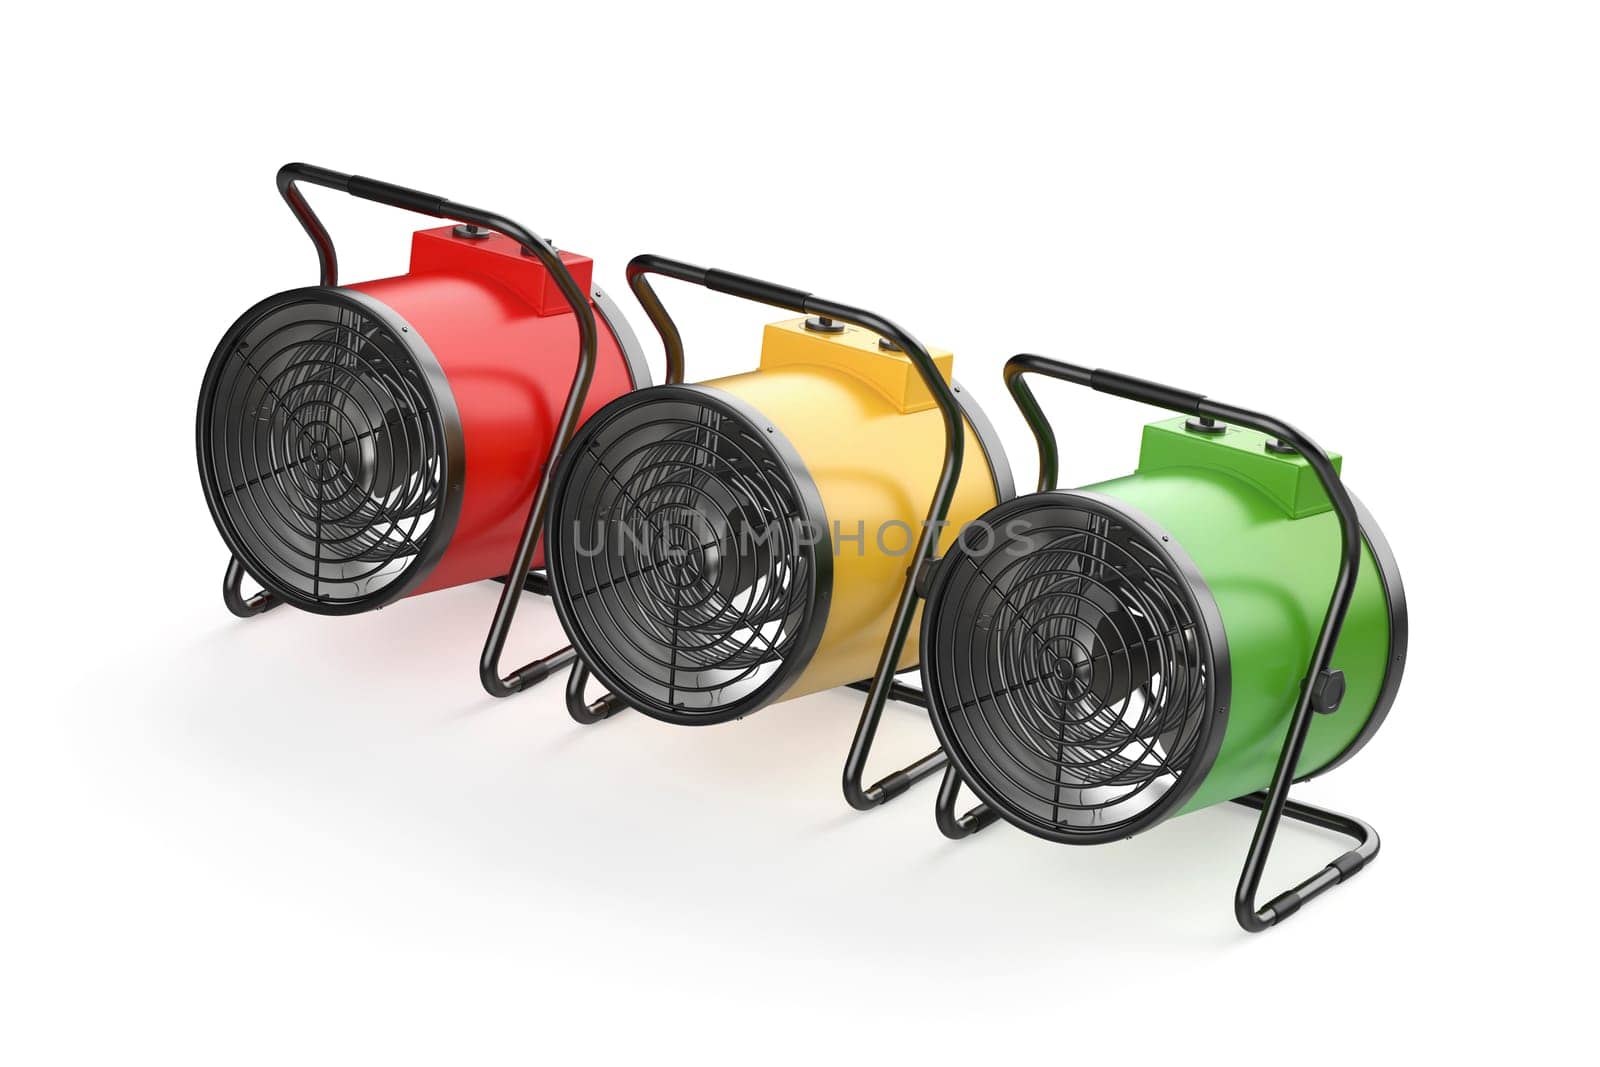 Three electric fan heaters with different colors by magraphics